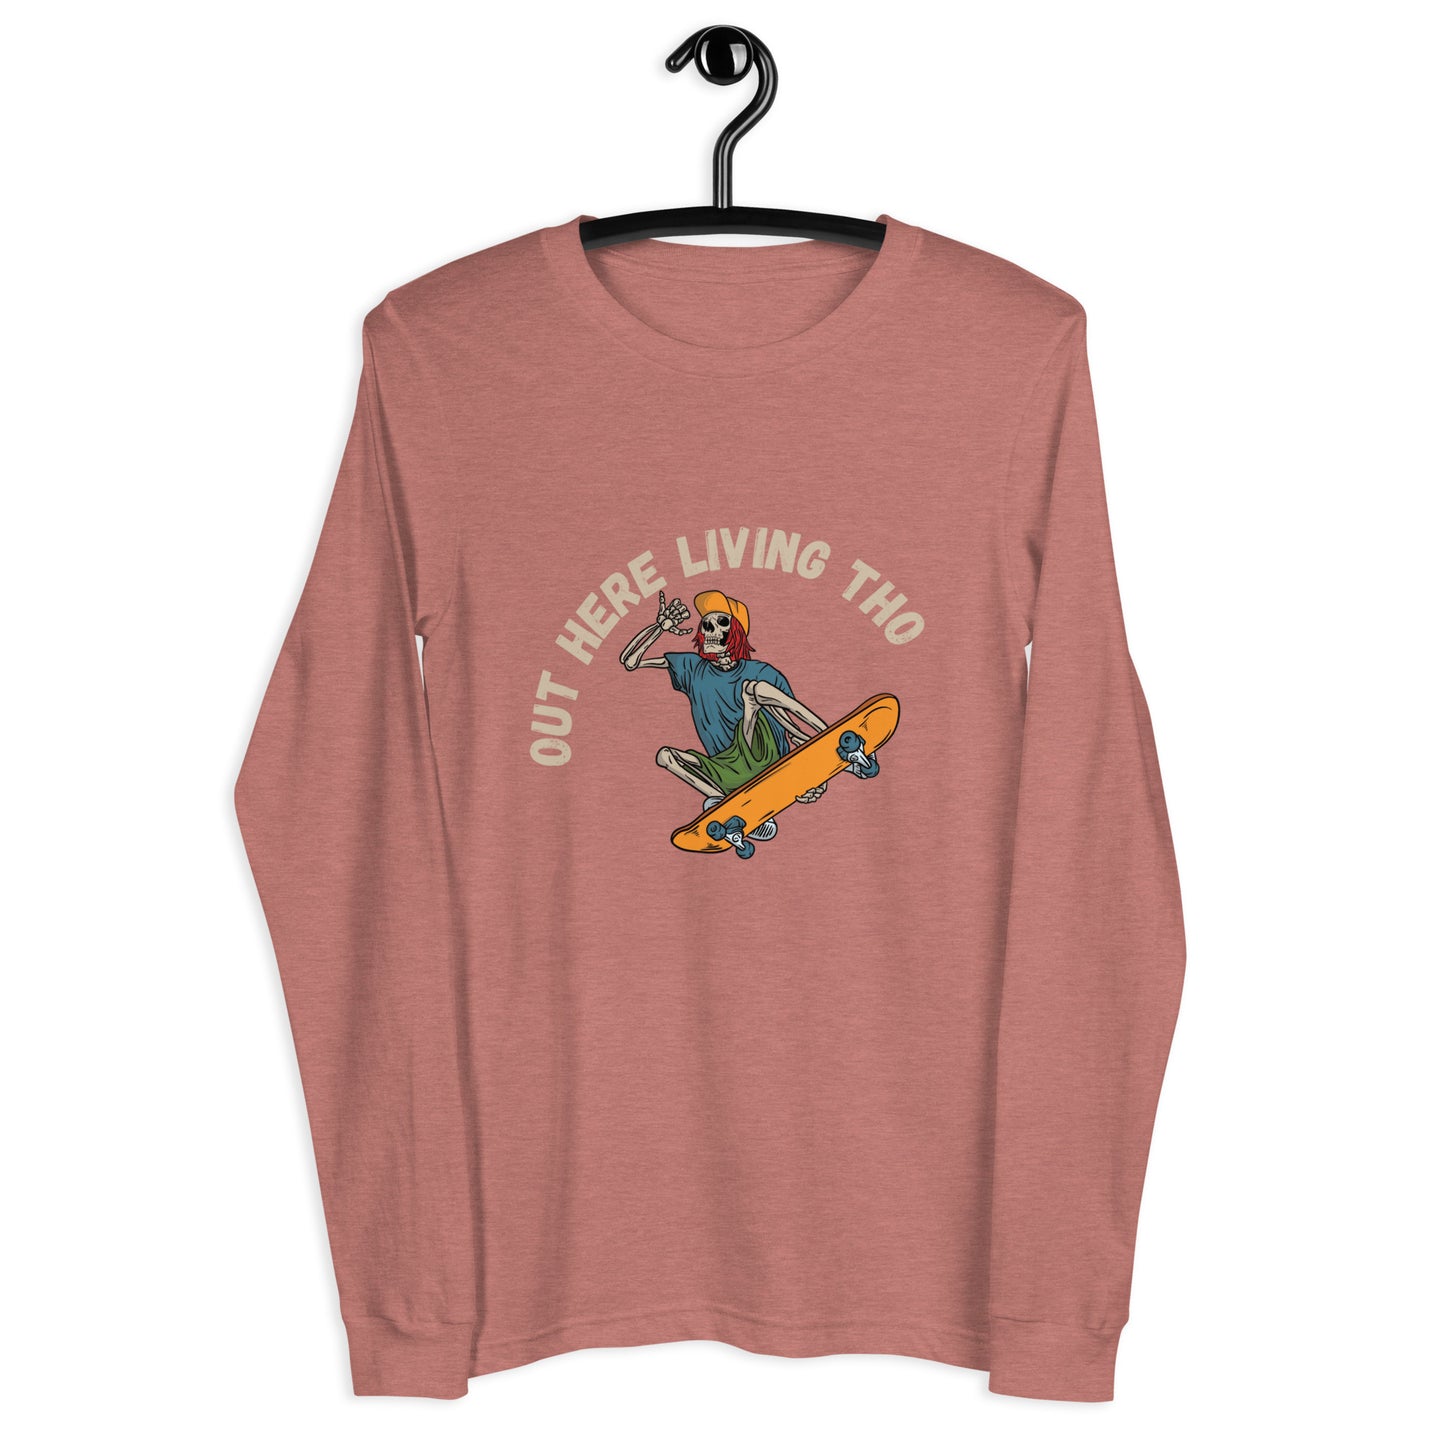 Unisex "Out Here Living Tho" Skeleton Long Sleeve Tee